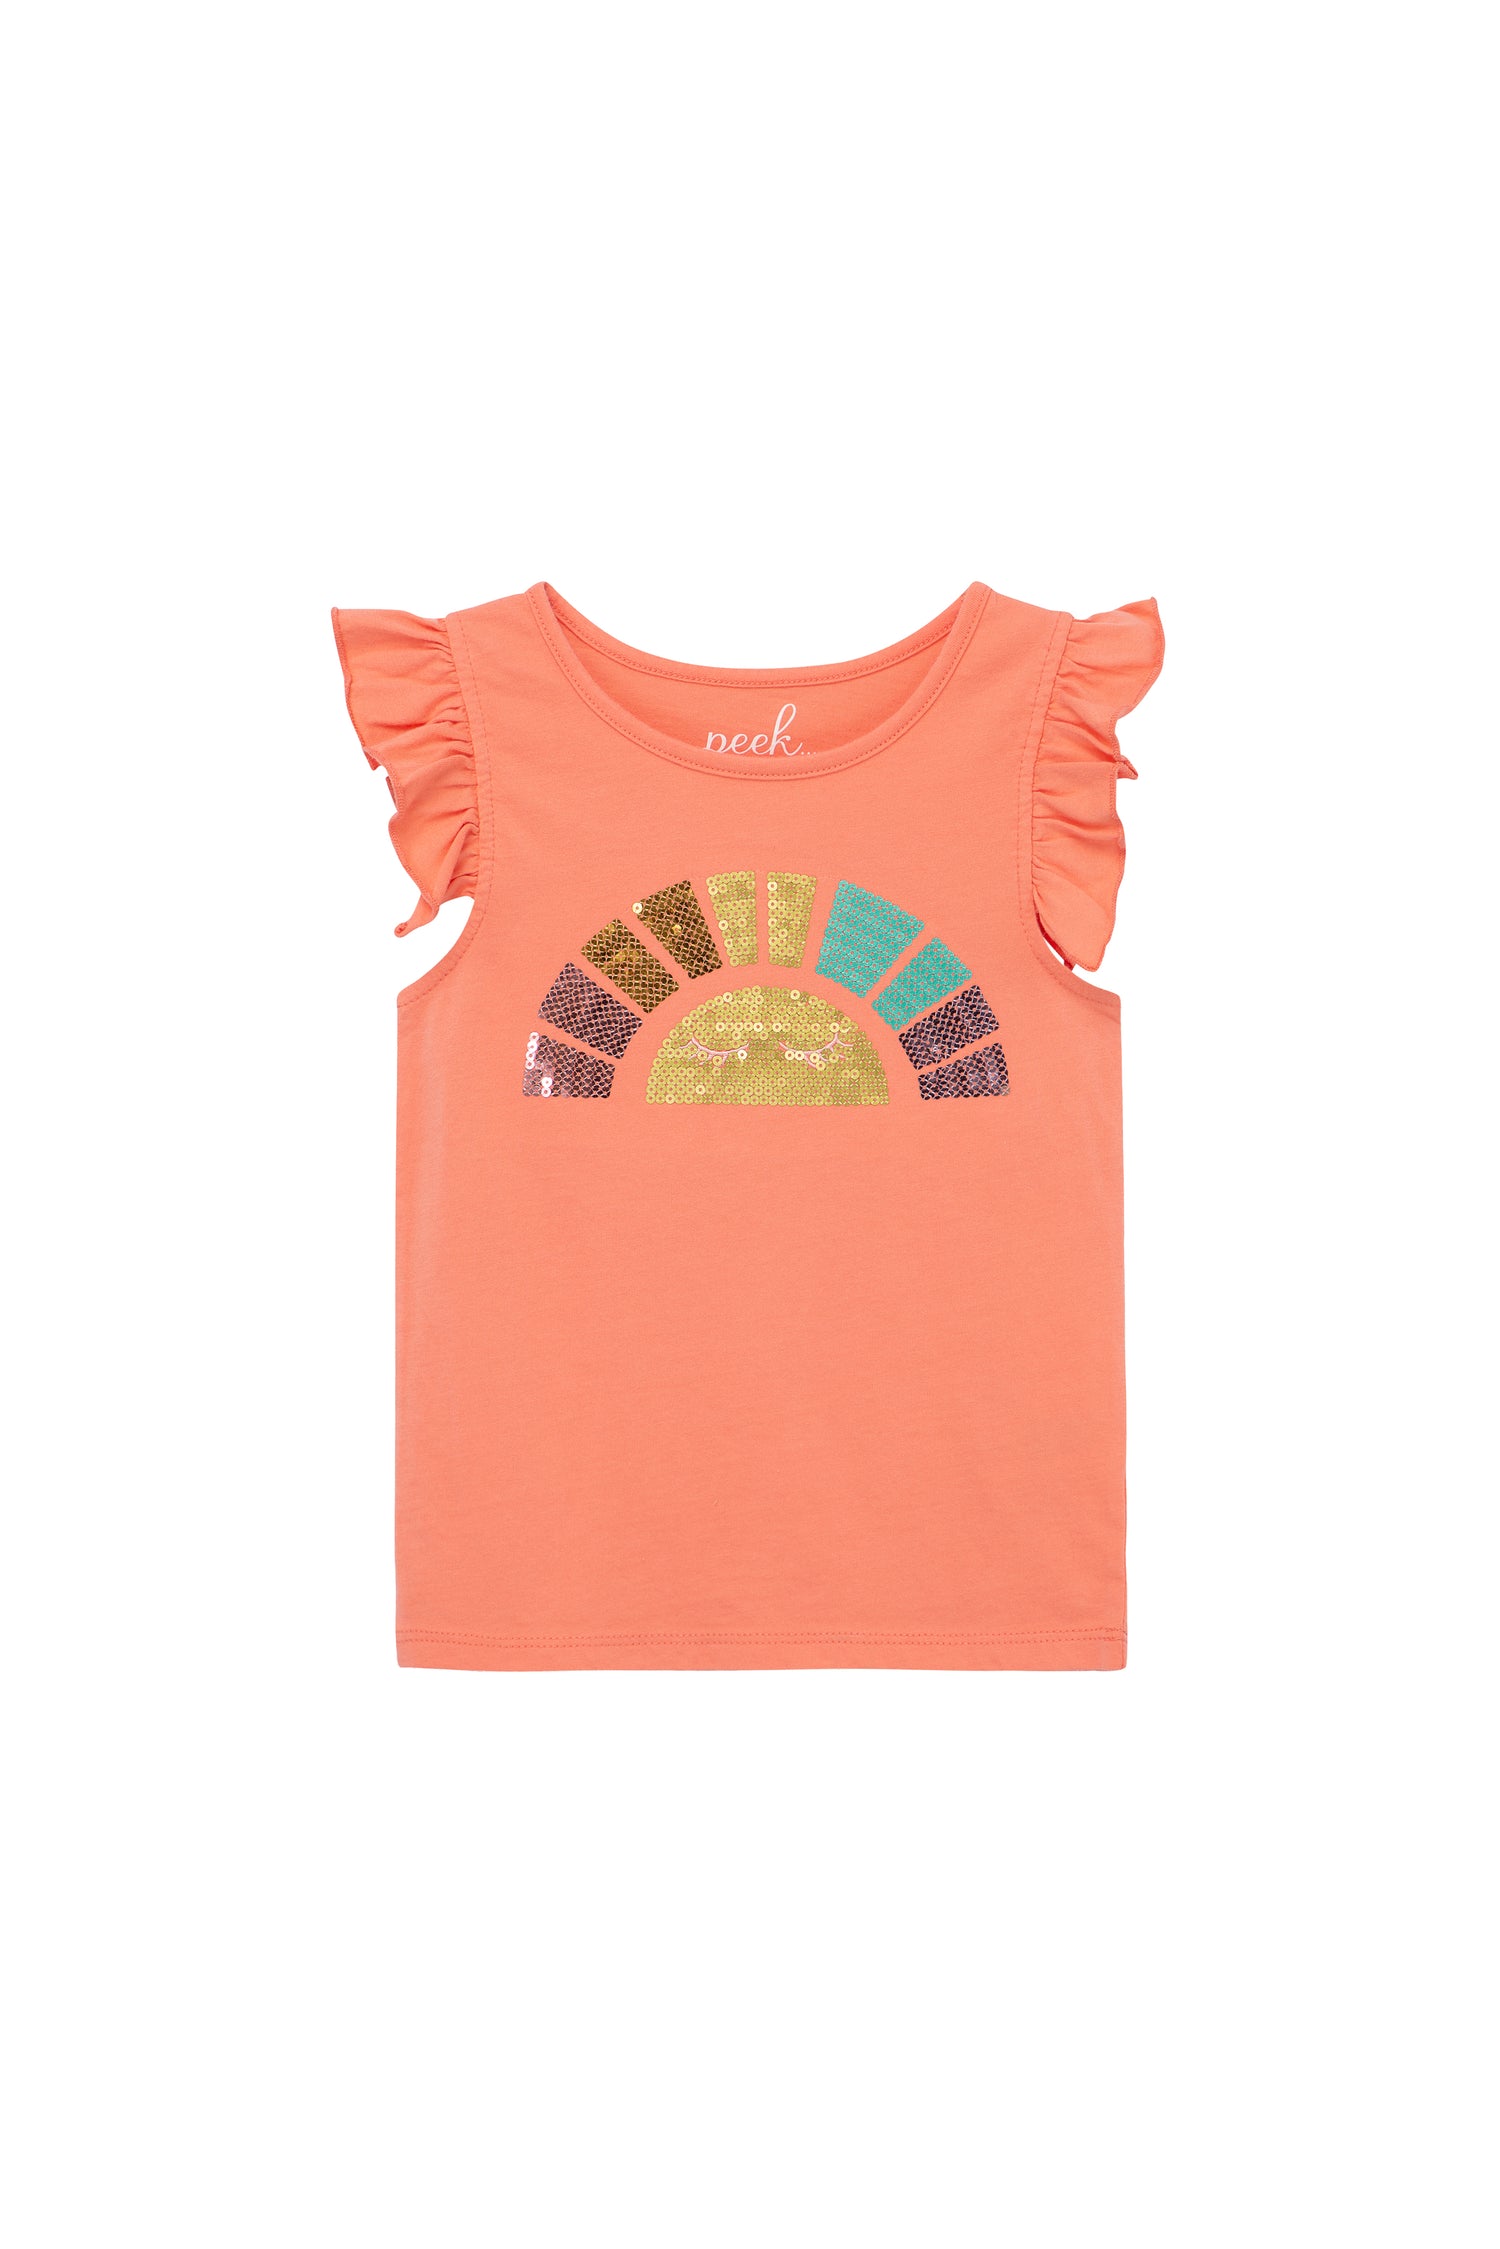 ORANGE T-SHIRT WITH SUN GRAPHIC IN SEQUINS